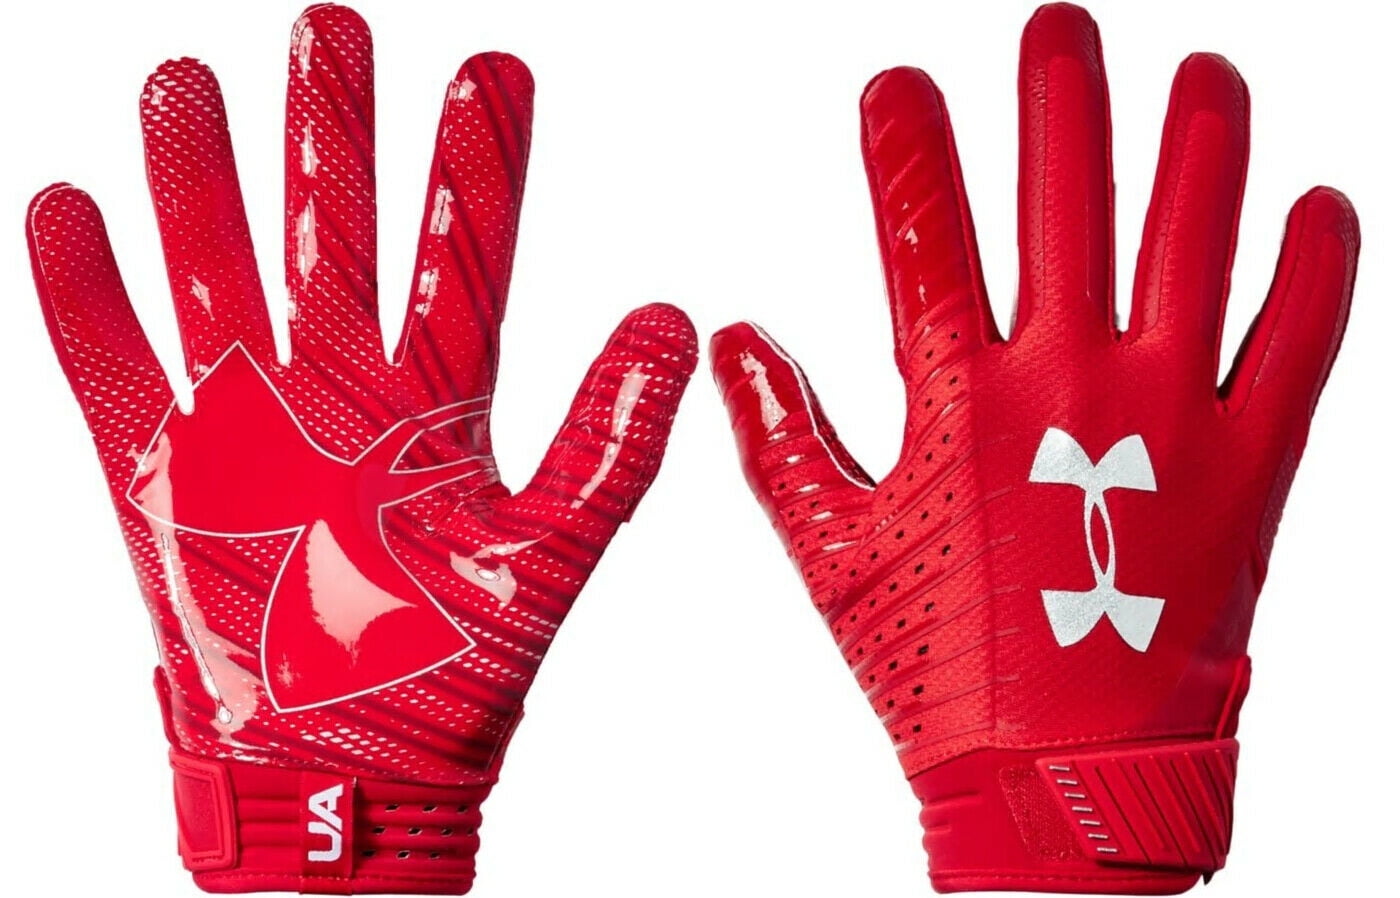 Small-Medium 601 Details about   Under Armour Men Spotlight Football Receiver Gloves,Red White 